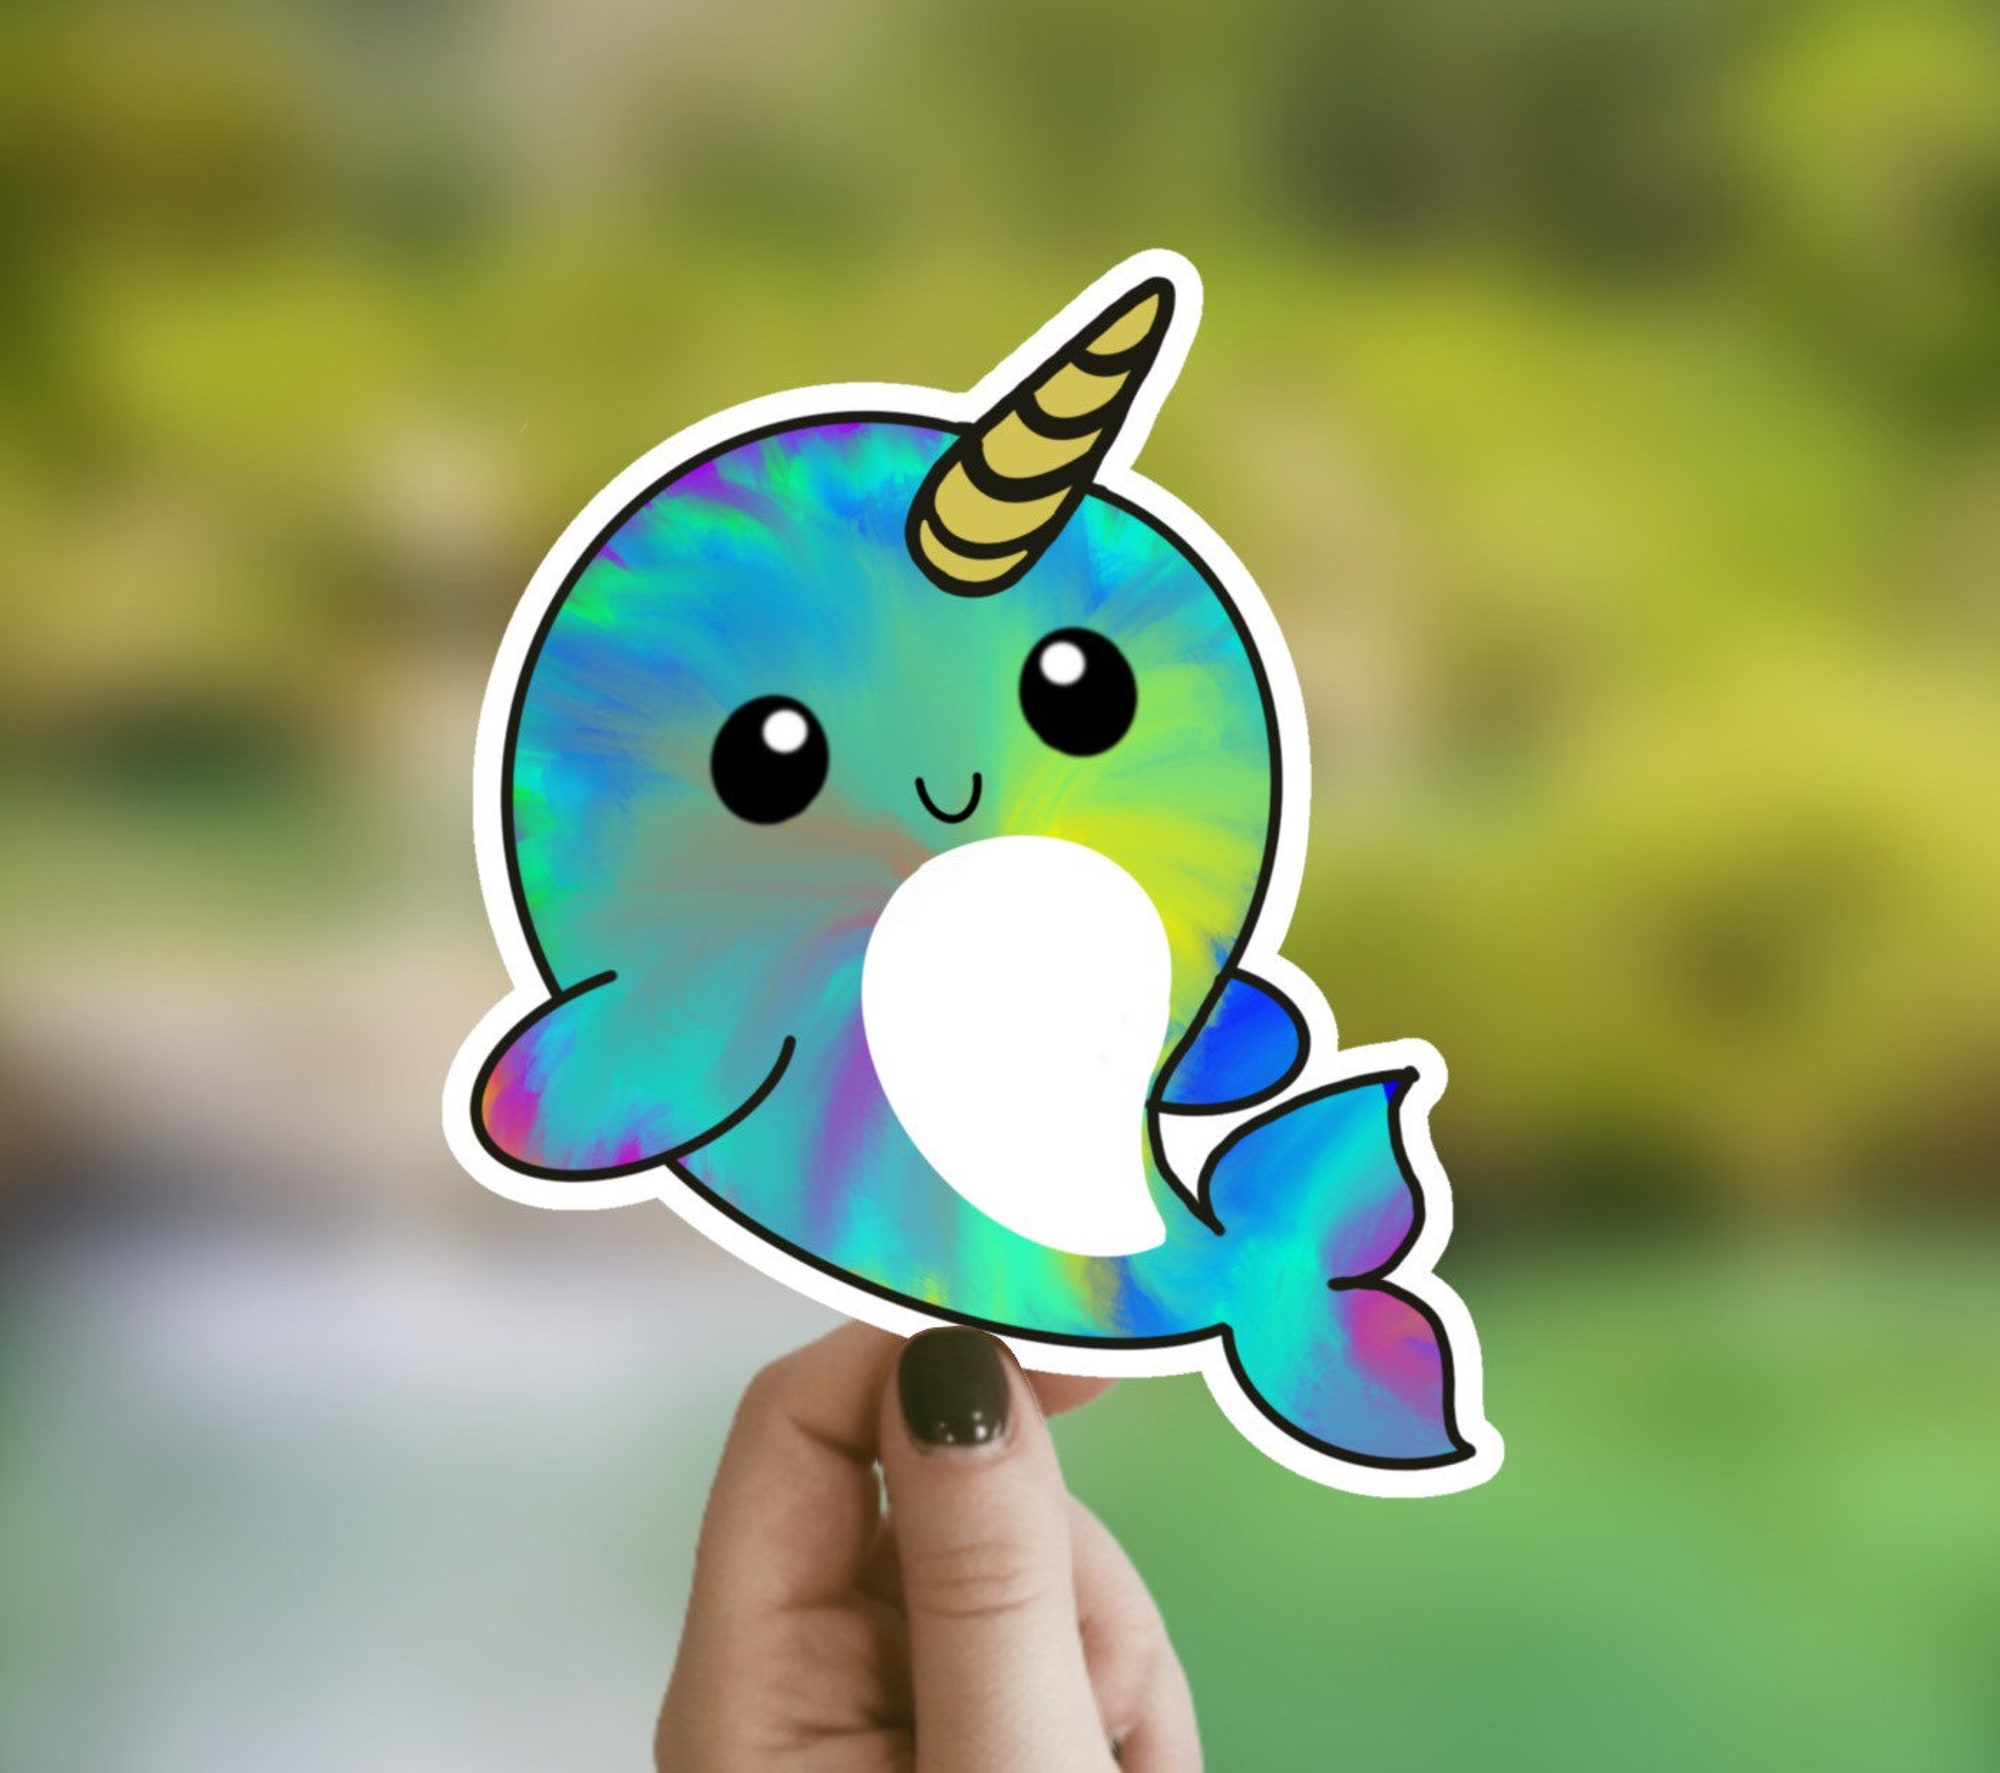 Discover Cute Narwhal Sticker, Waterproof Sticker